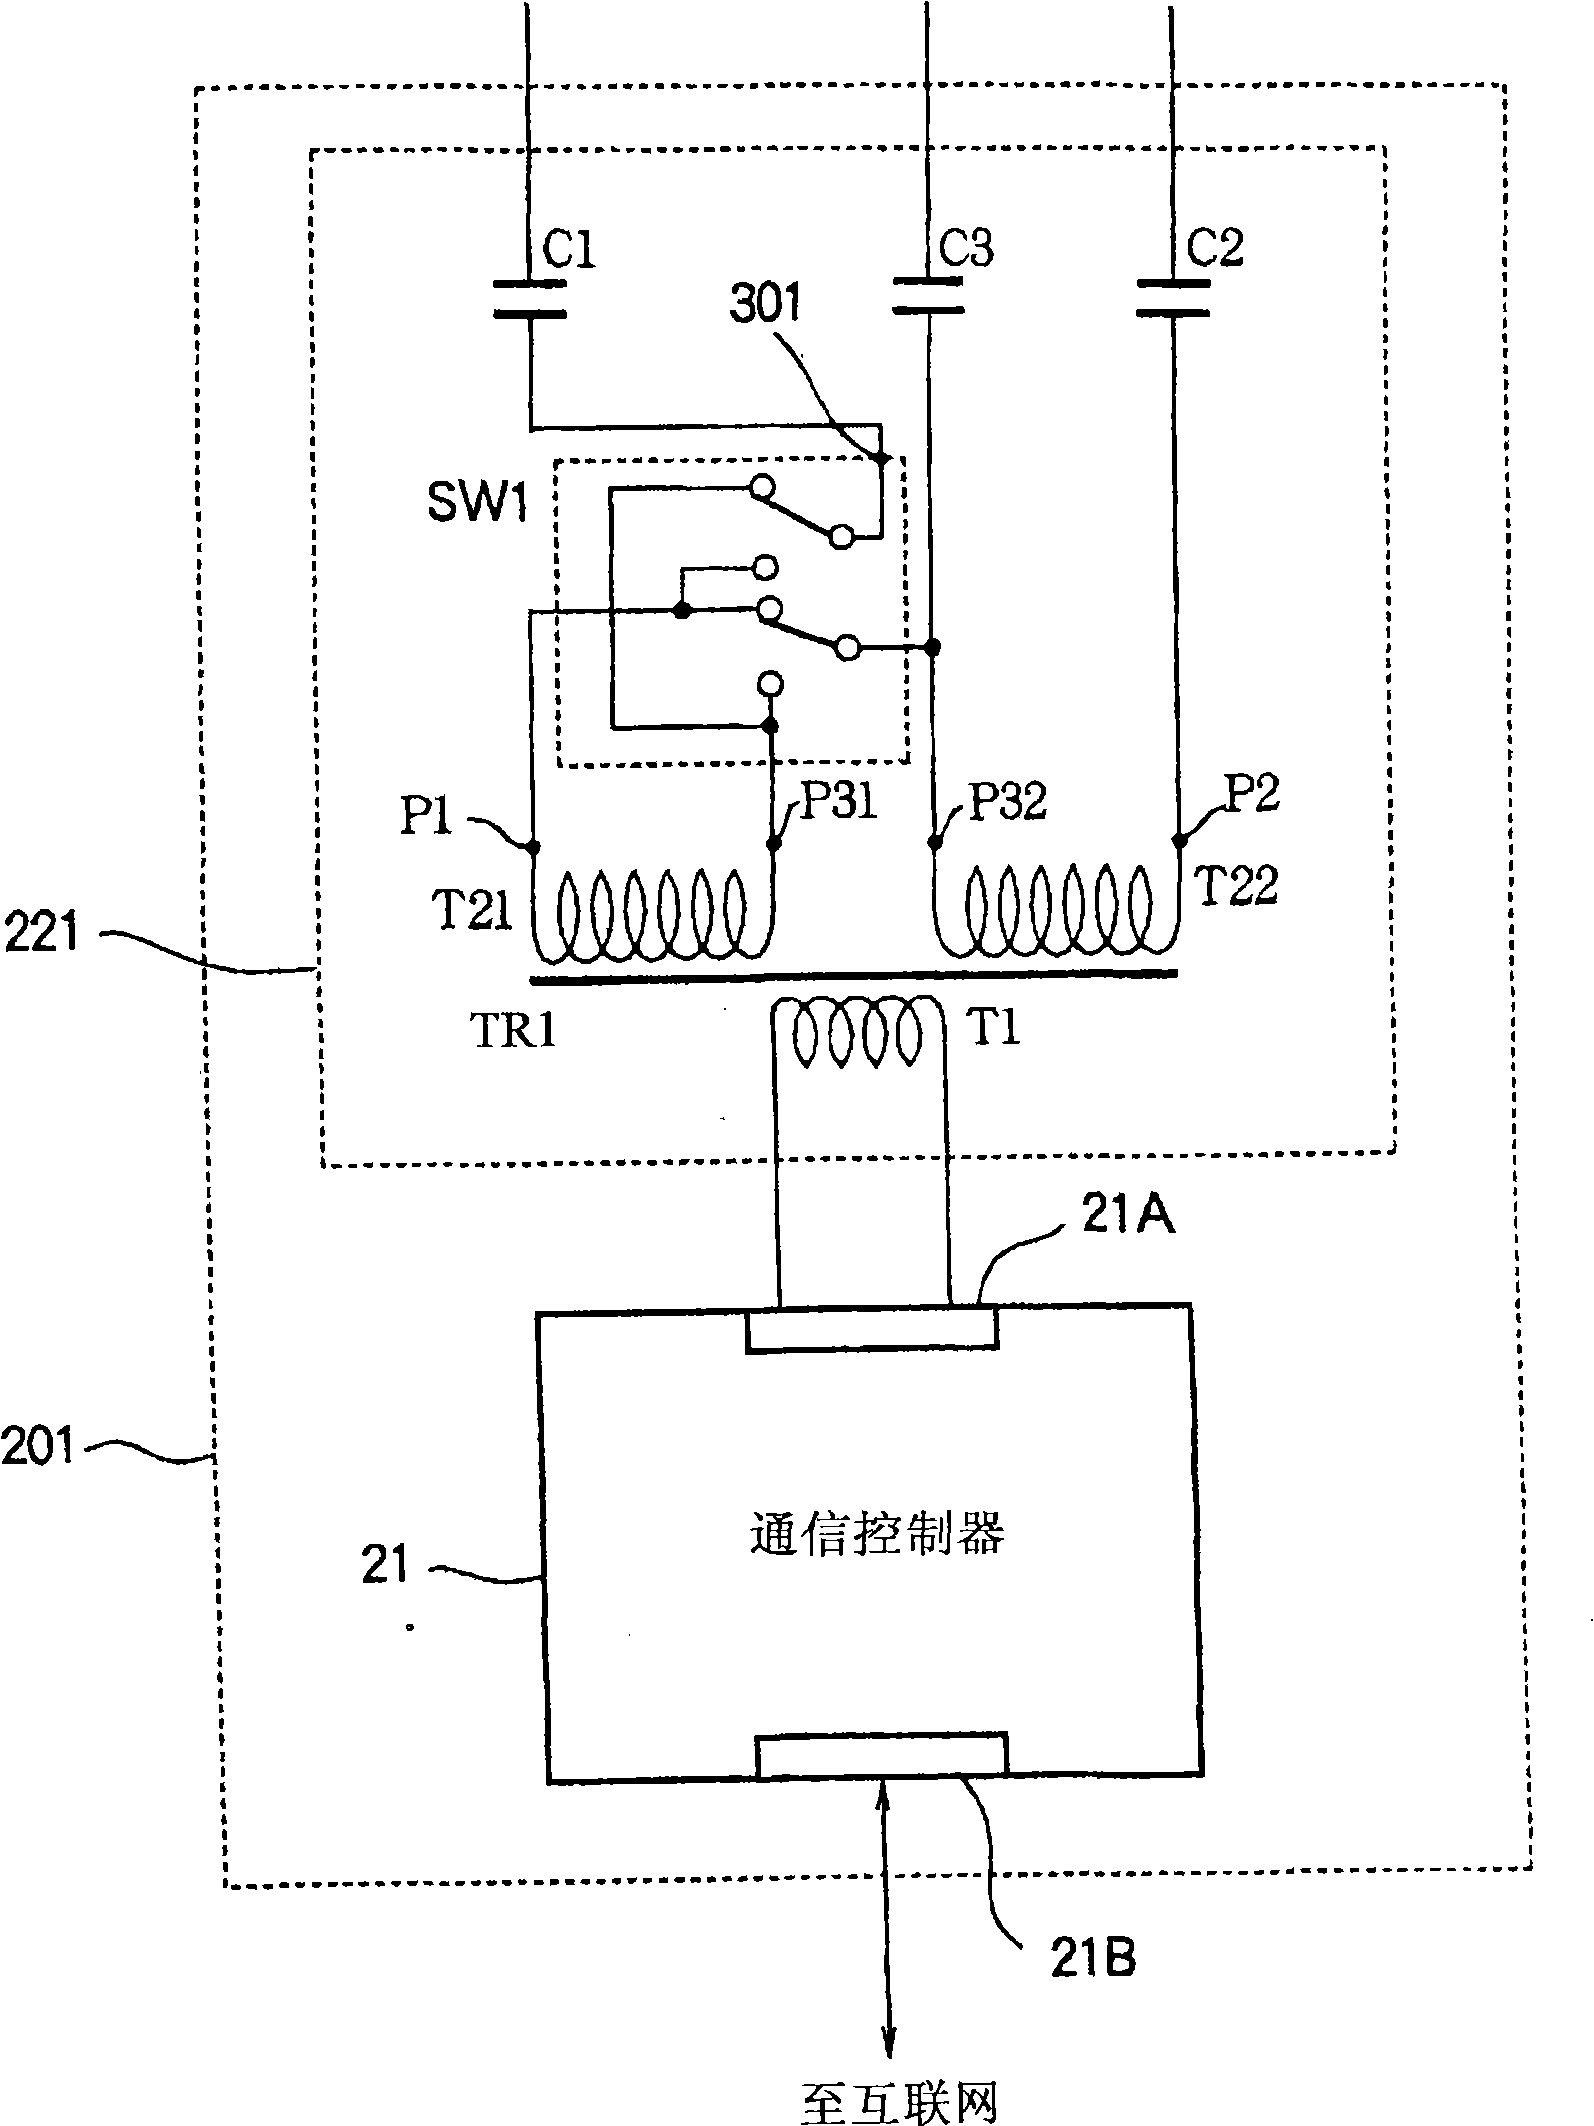 Coupling circuit and network device for power line communication